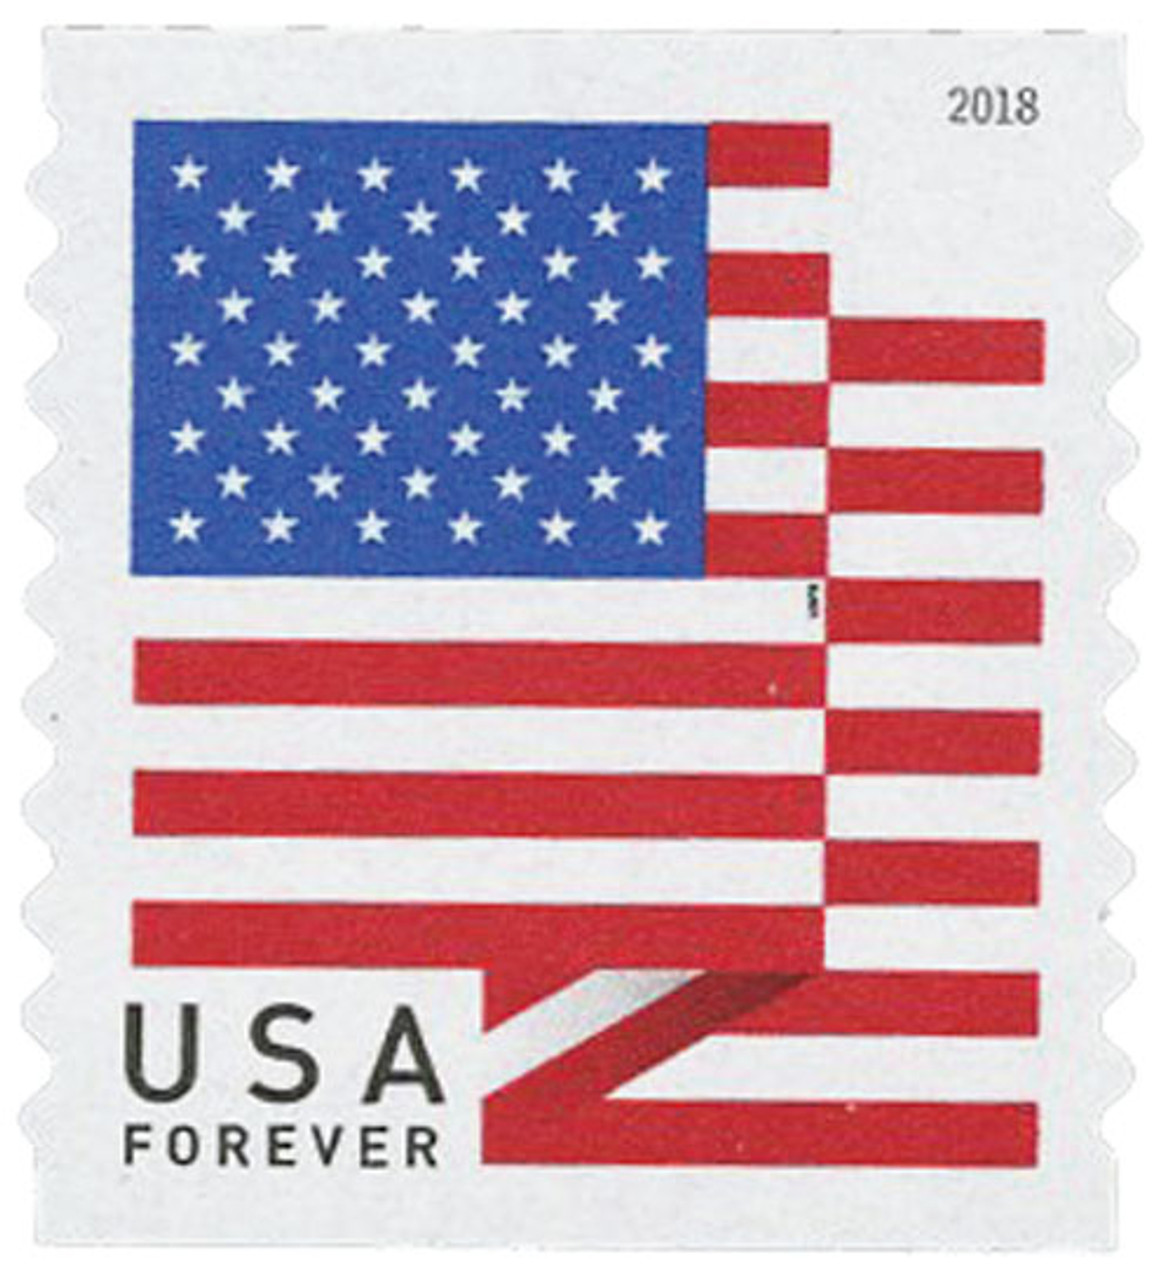 5260 - 2018 First-Class Forever Stamp - US Flag with Micro Print